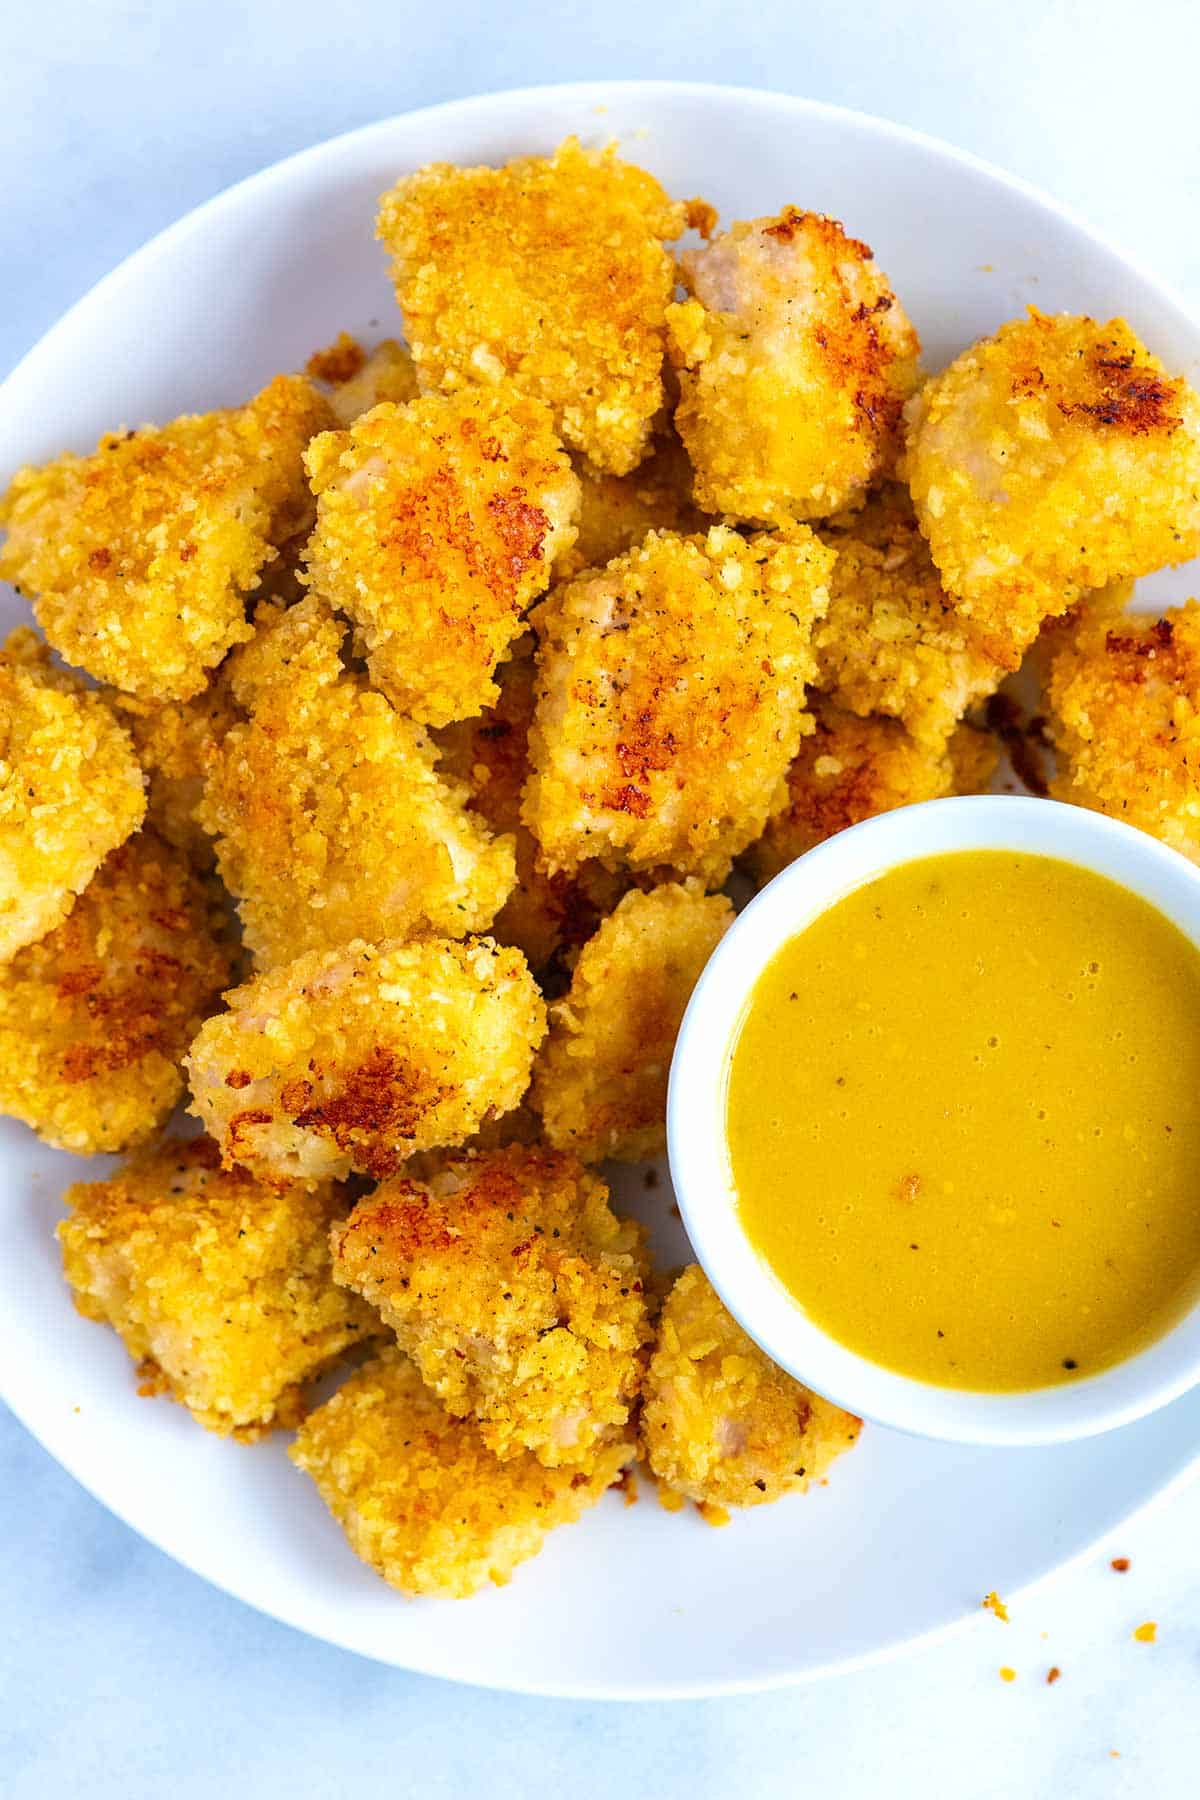 How to Make the Best Chicken Nuggets at Home